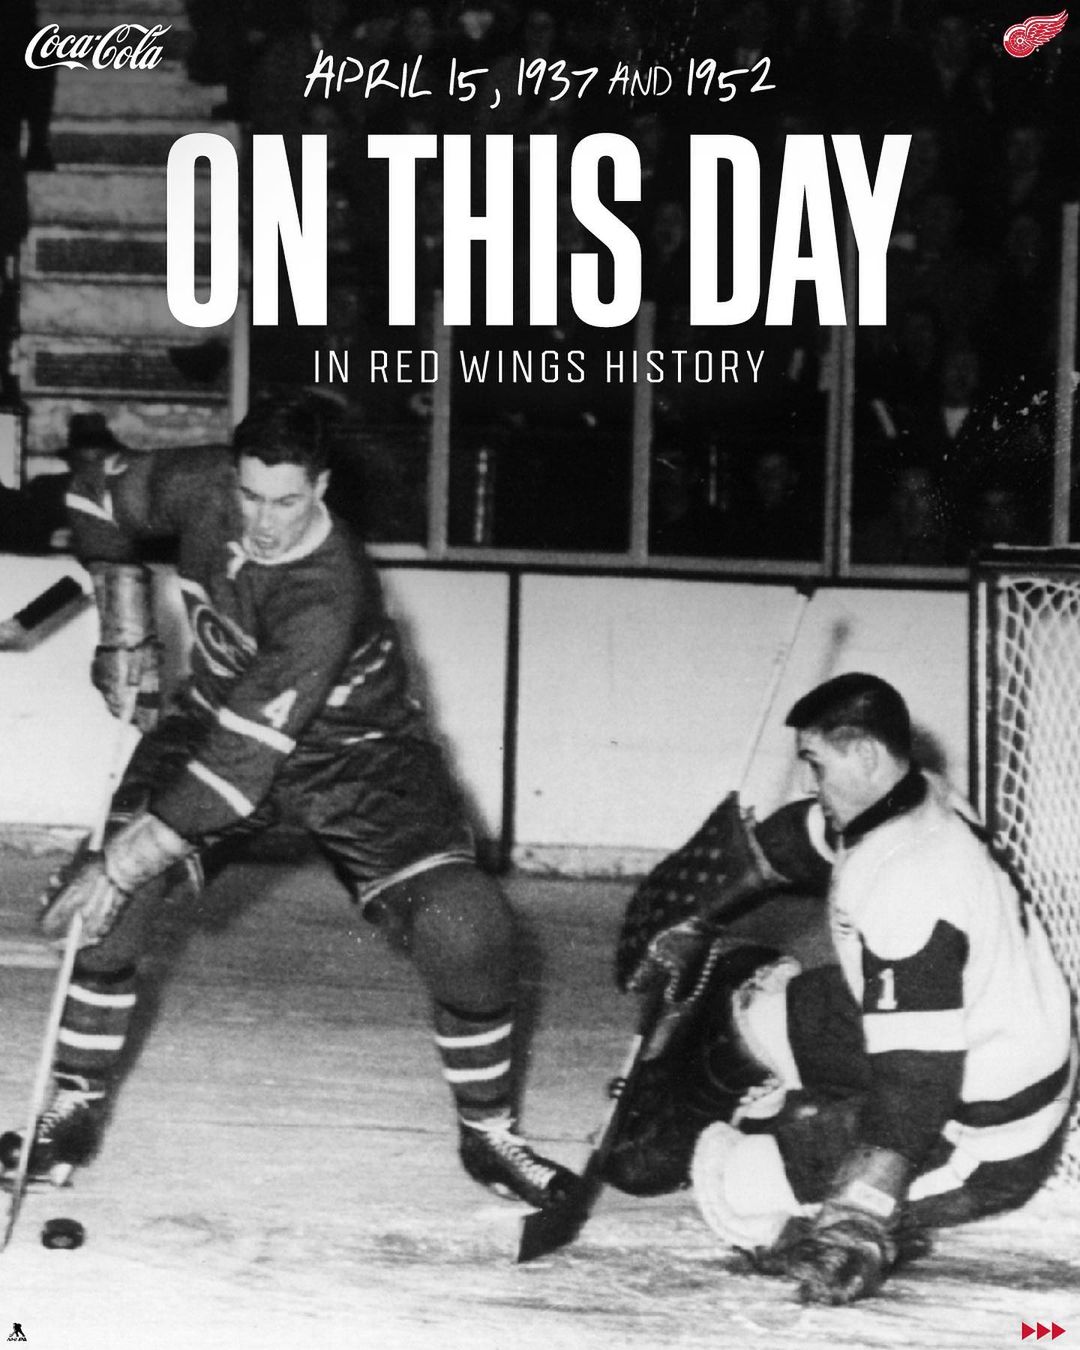 #otd in 1937 & 1952: Stanley Cup Champs!  #lgrw...